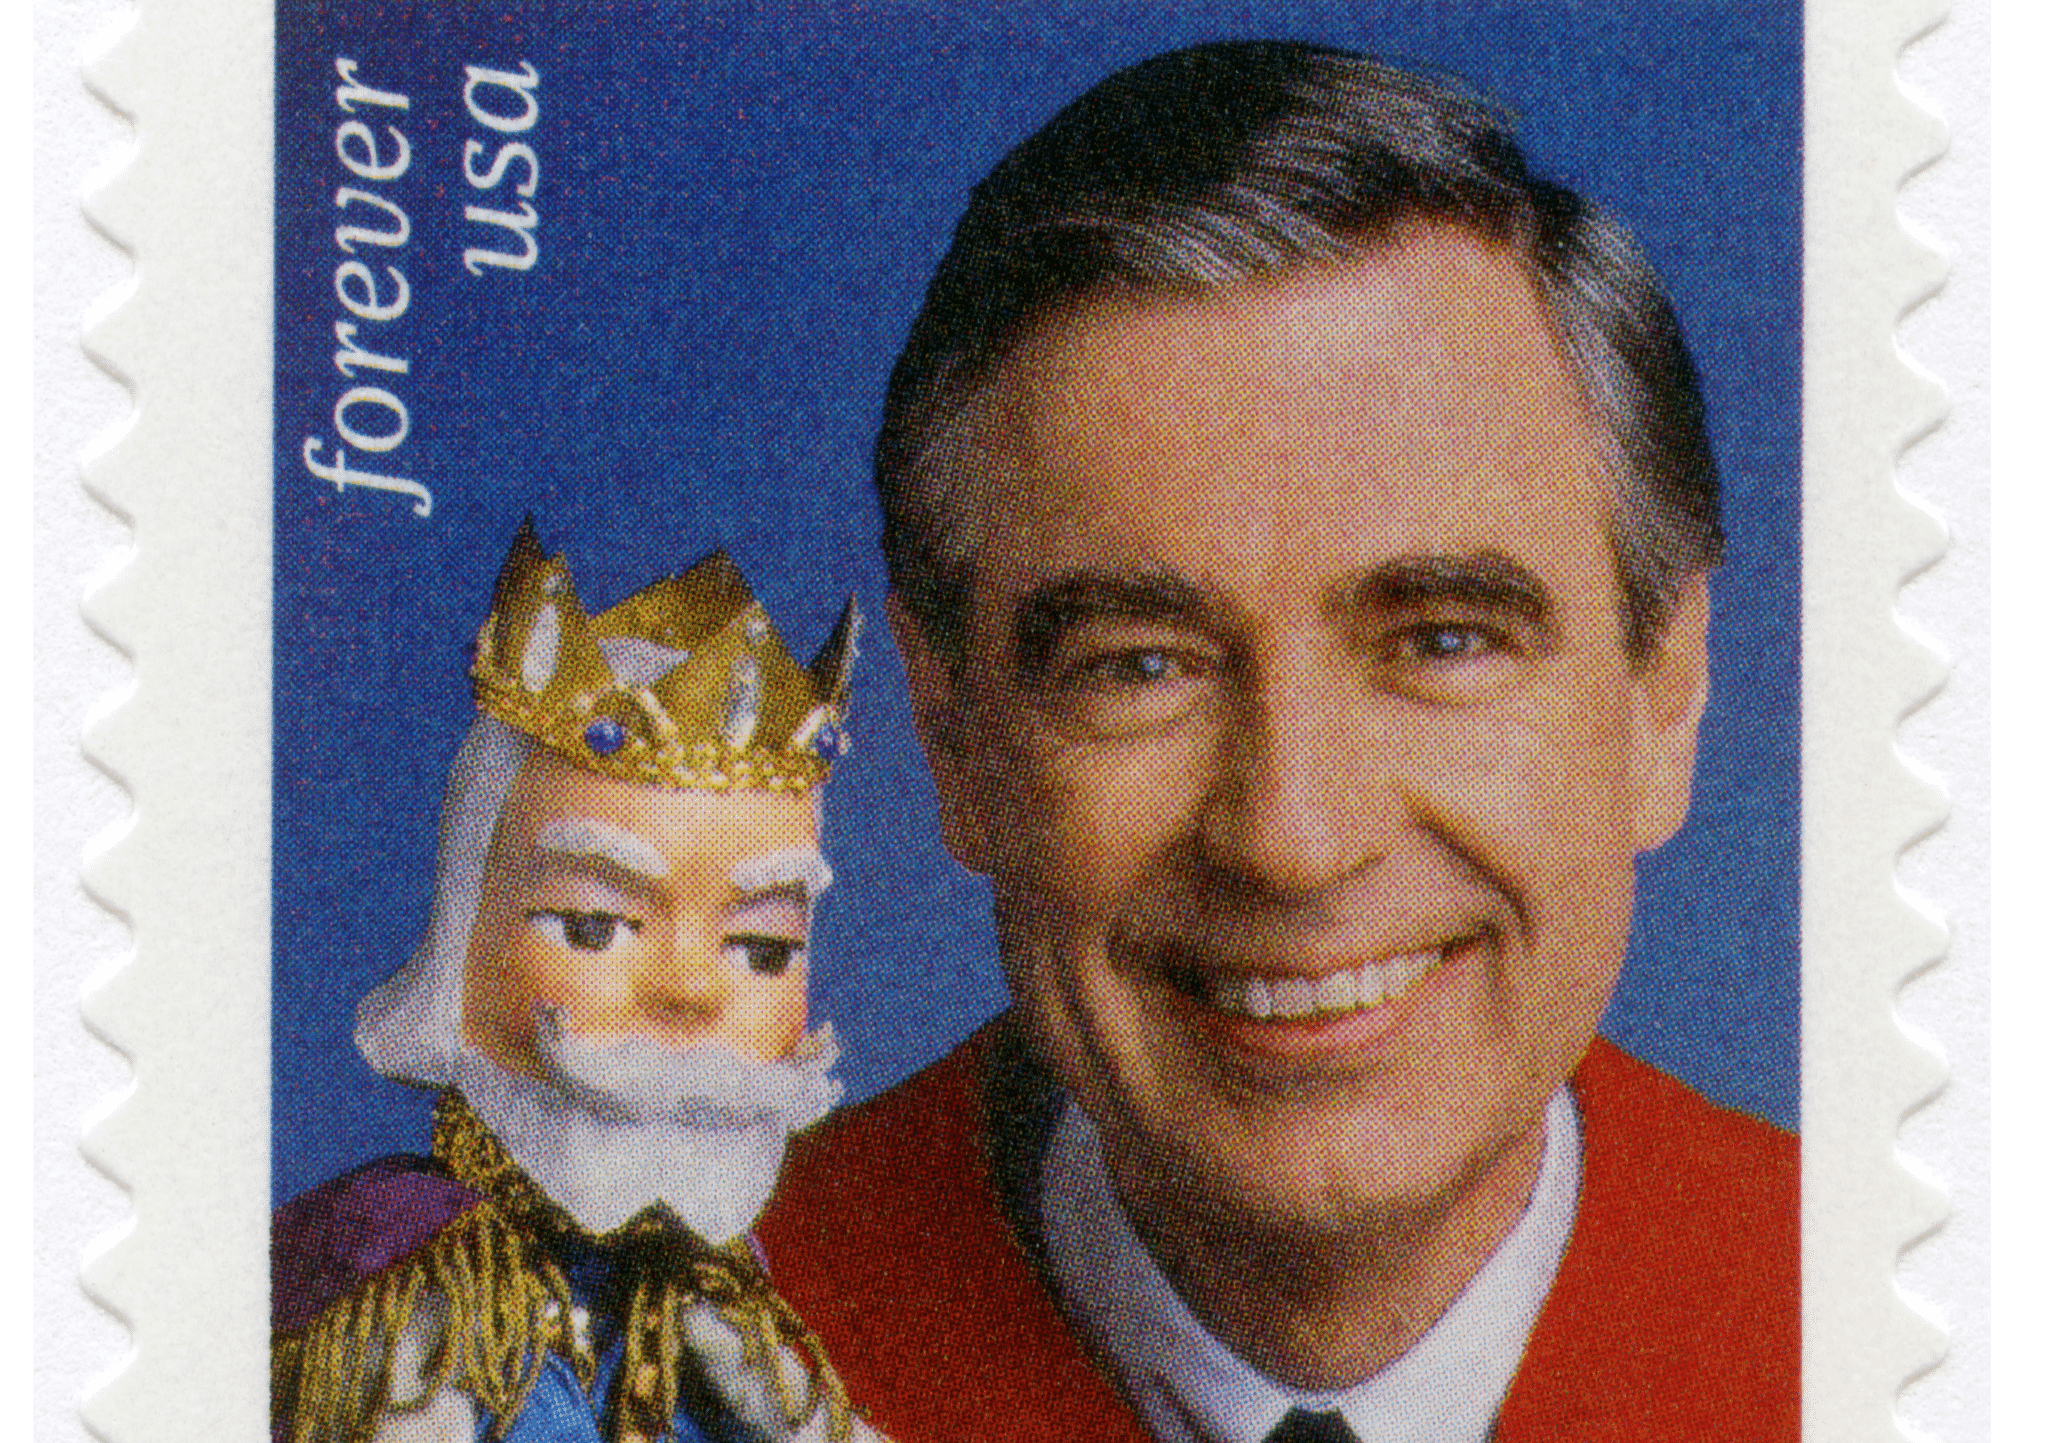 WASHINGTON, USA - MARCH 23, 2018: A stamp printed in USA shows portrait of Fred McFeely Mister Rogers (1928-2003), series Forever, 2018